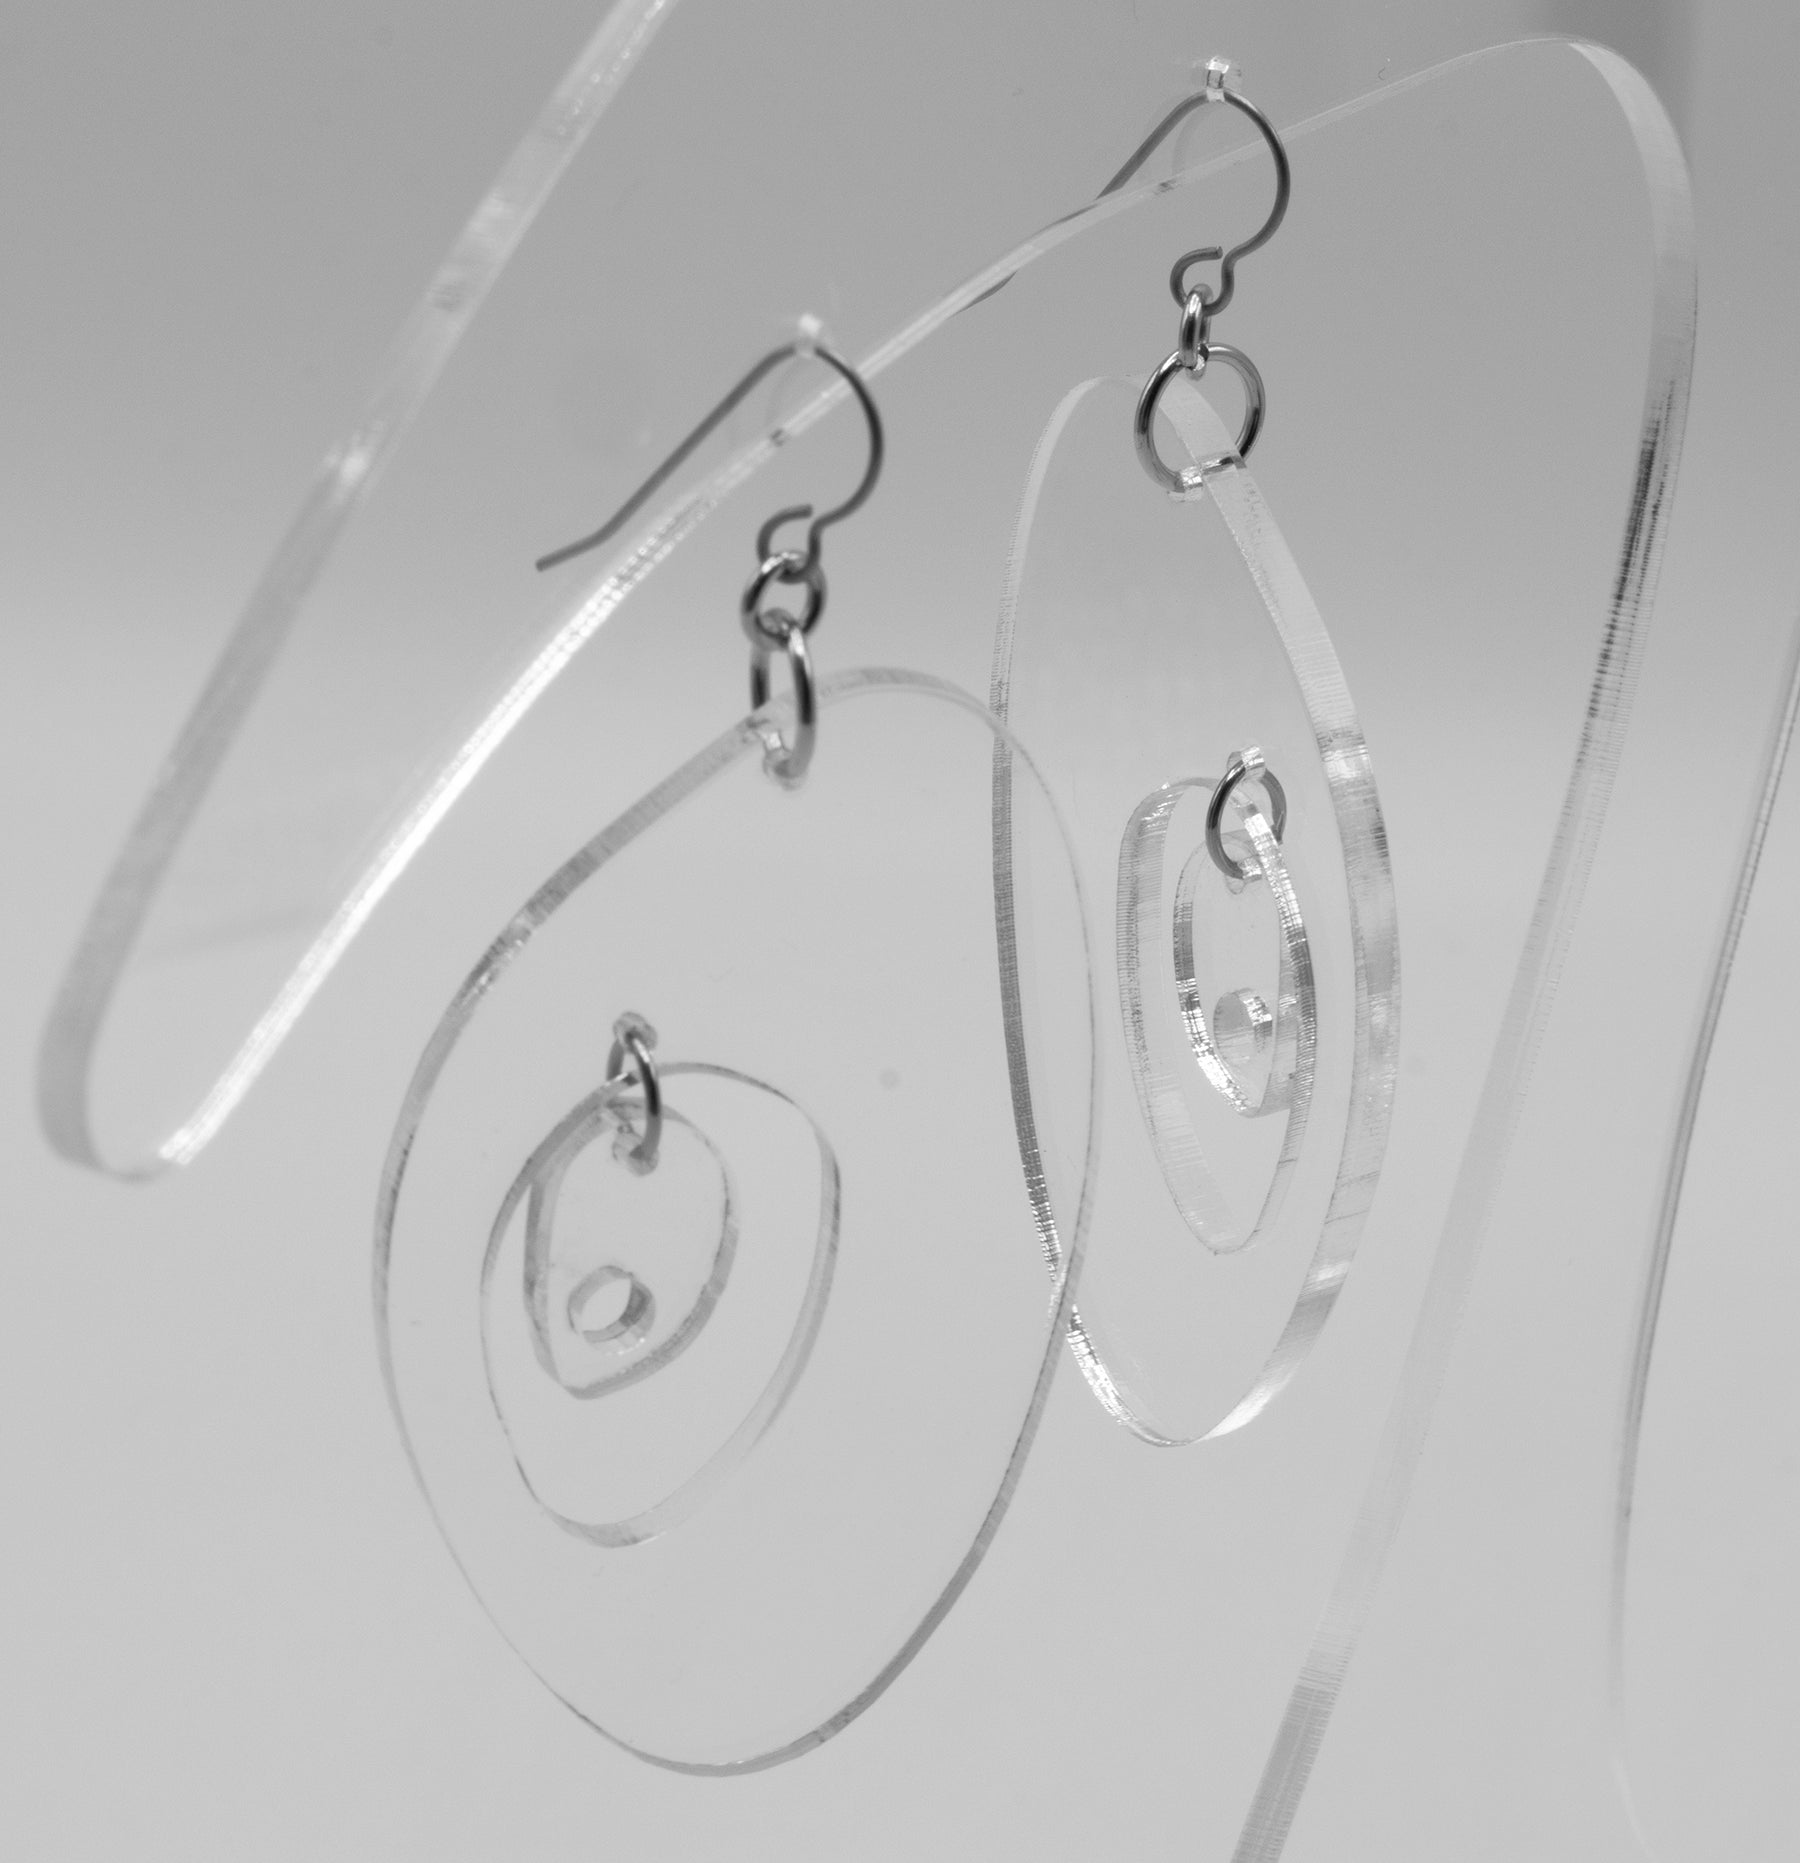 MODular Earrings - The Modernist Statement Earrings in Clear Acrylic by AtomicMobiles.com - retro era inspired mod handmade jewelry